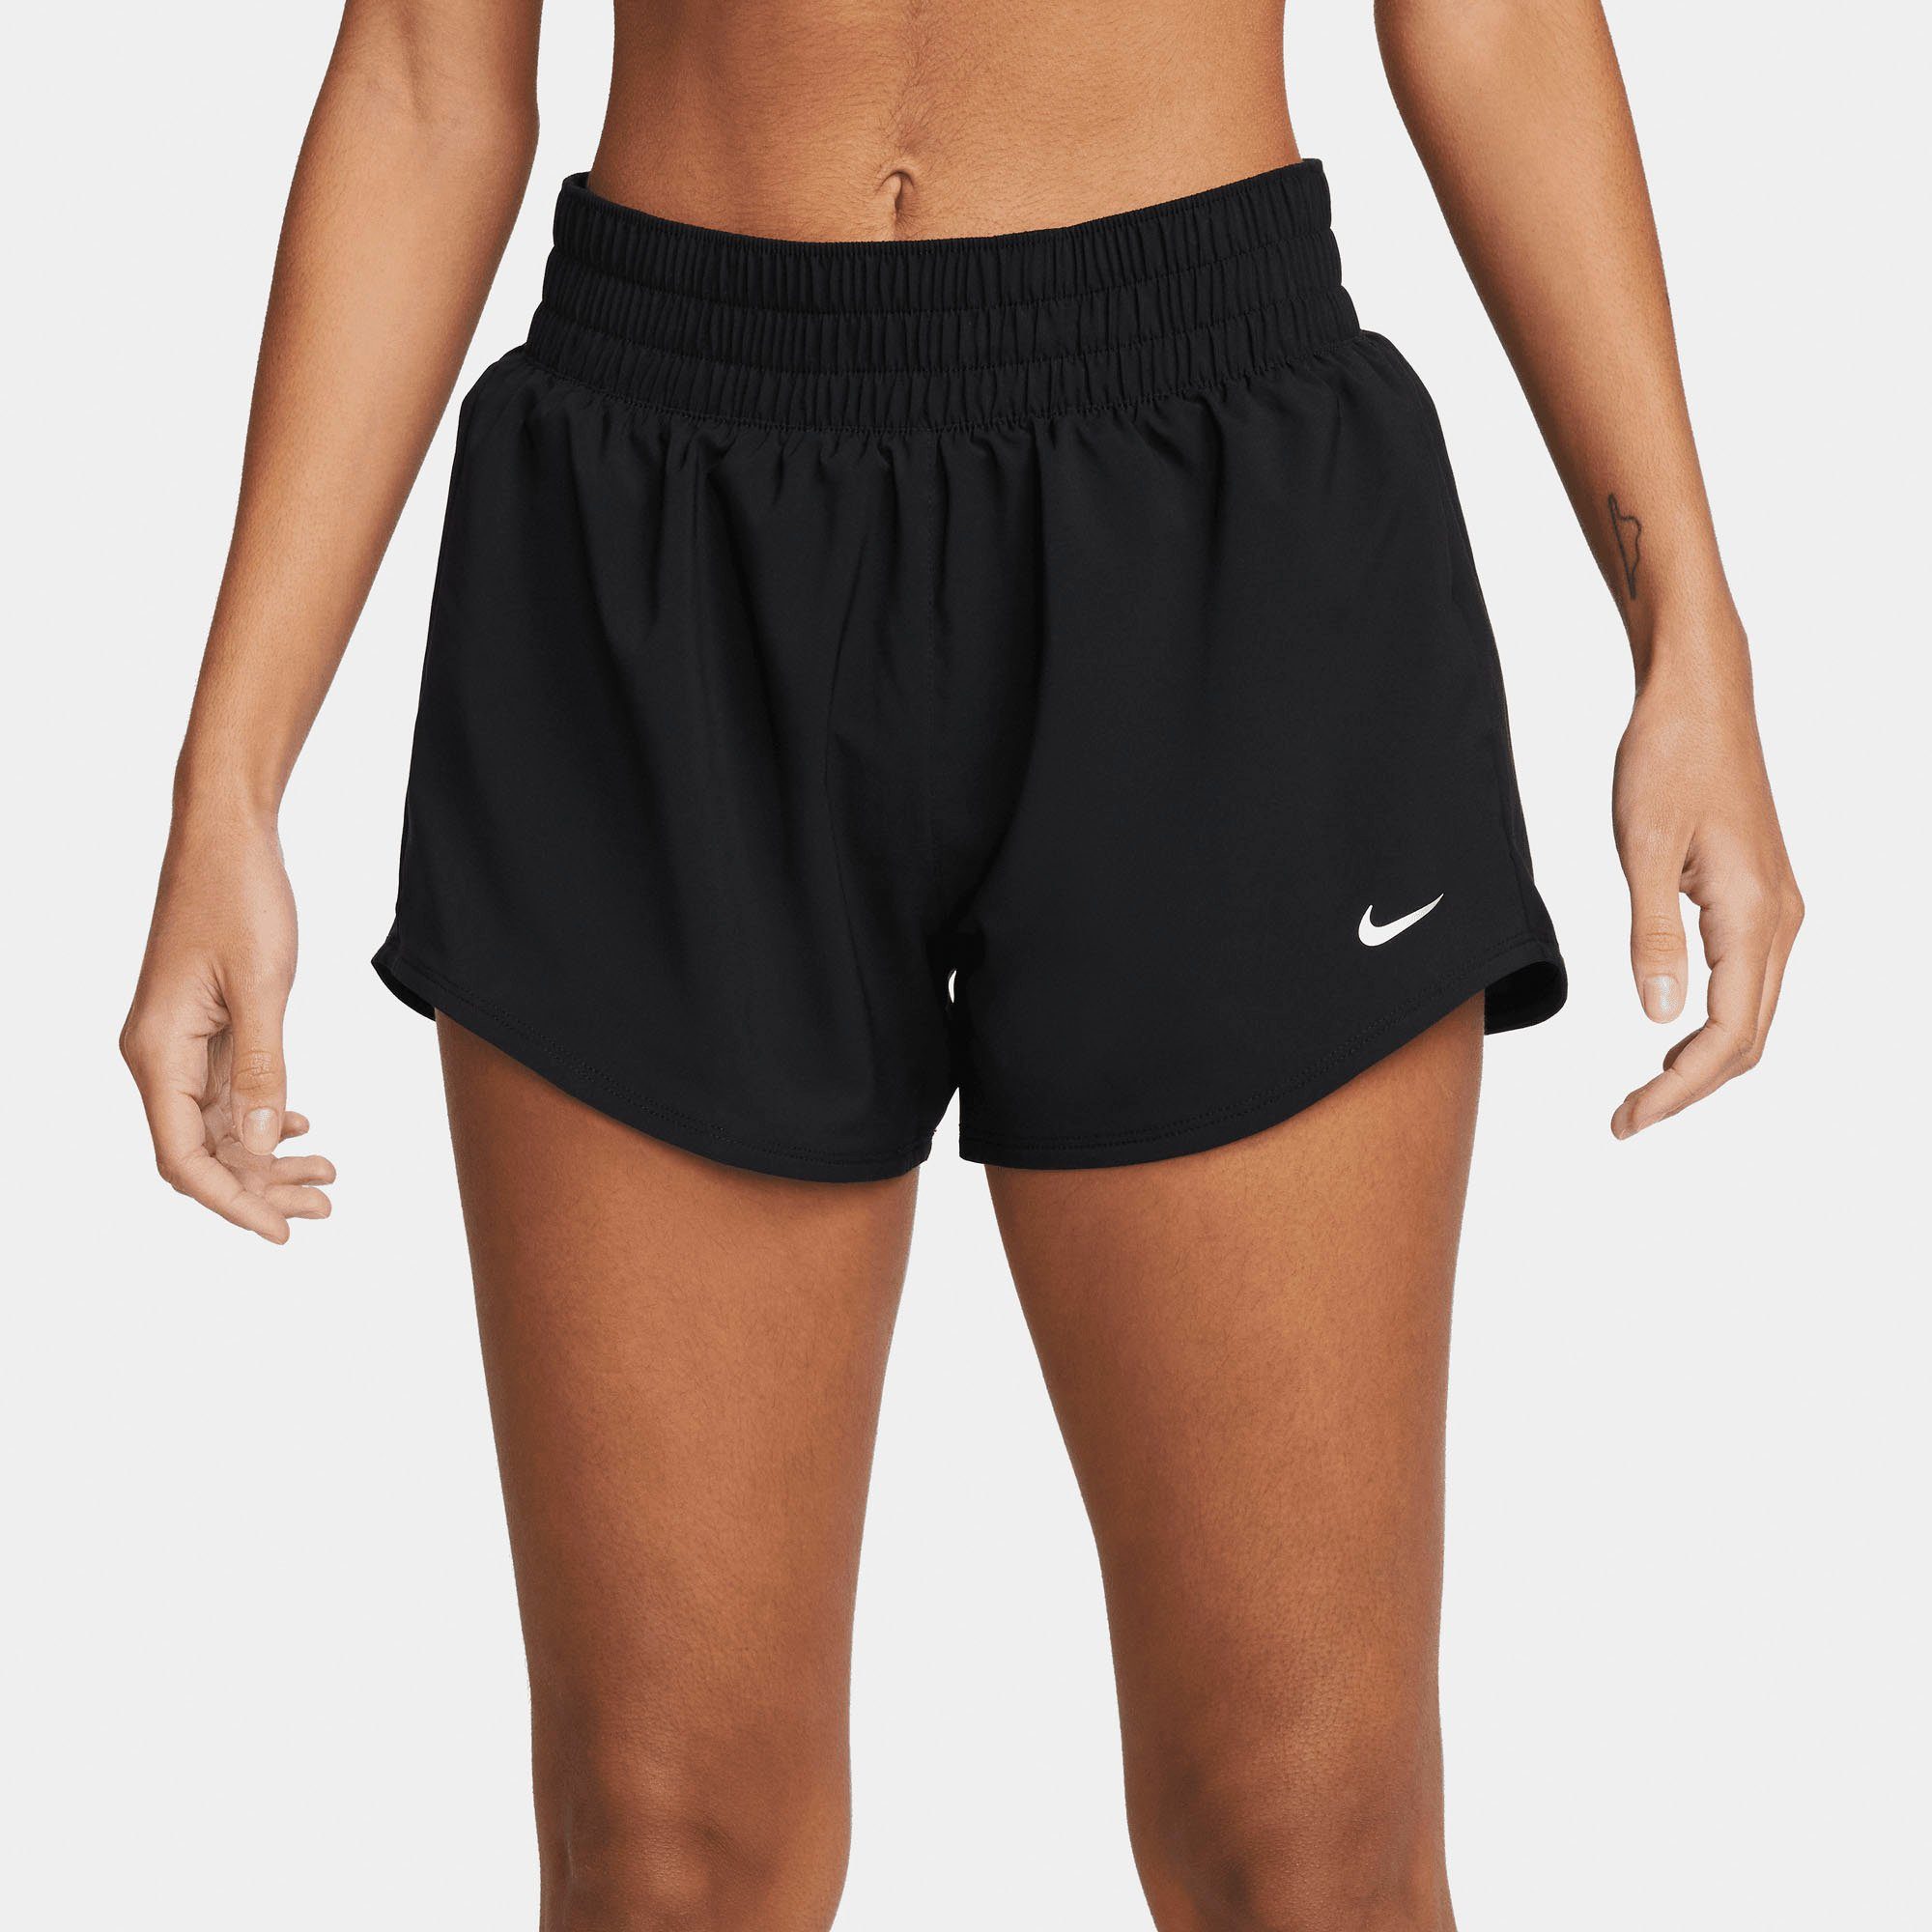 MID-RISE ONE Trainingsshorts SILV SHORTS BLACK/REFLECTIVE DRI-FIT Nike WOMEN'S BRIEF-LINED